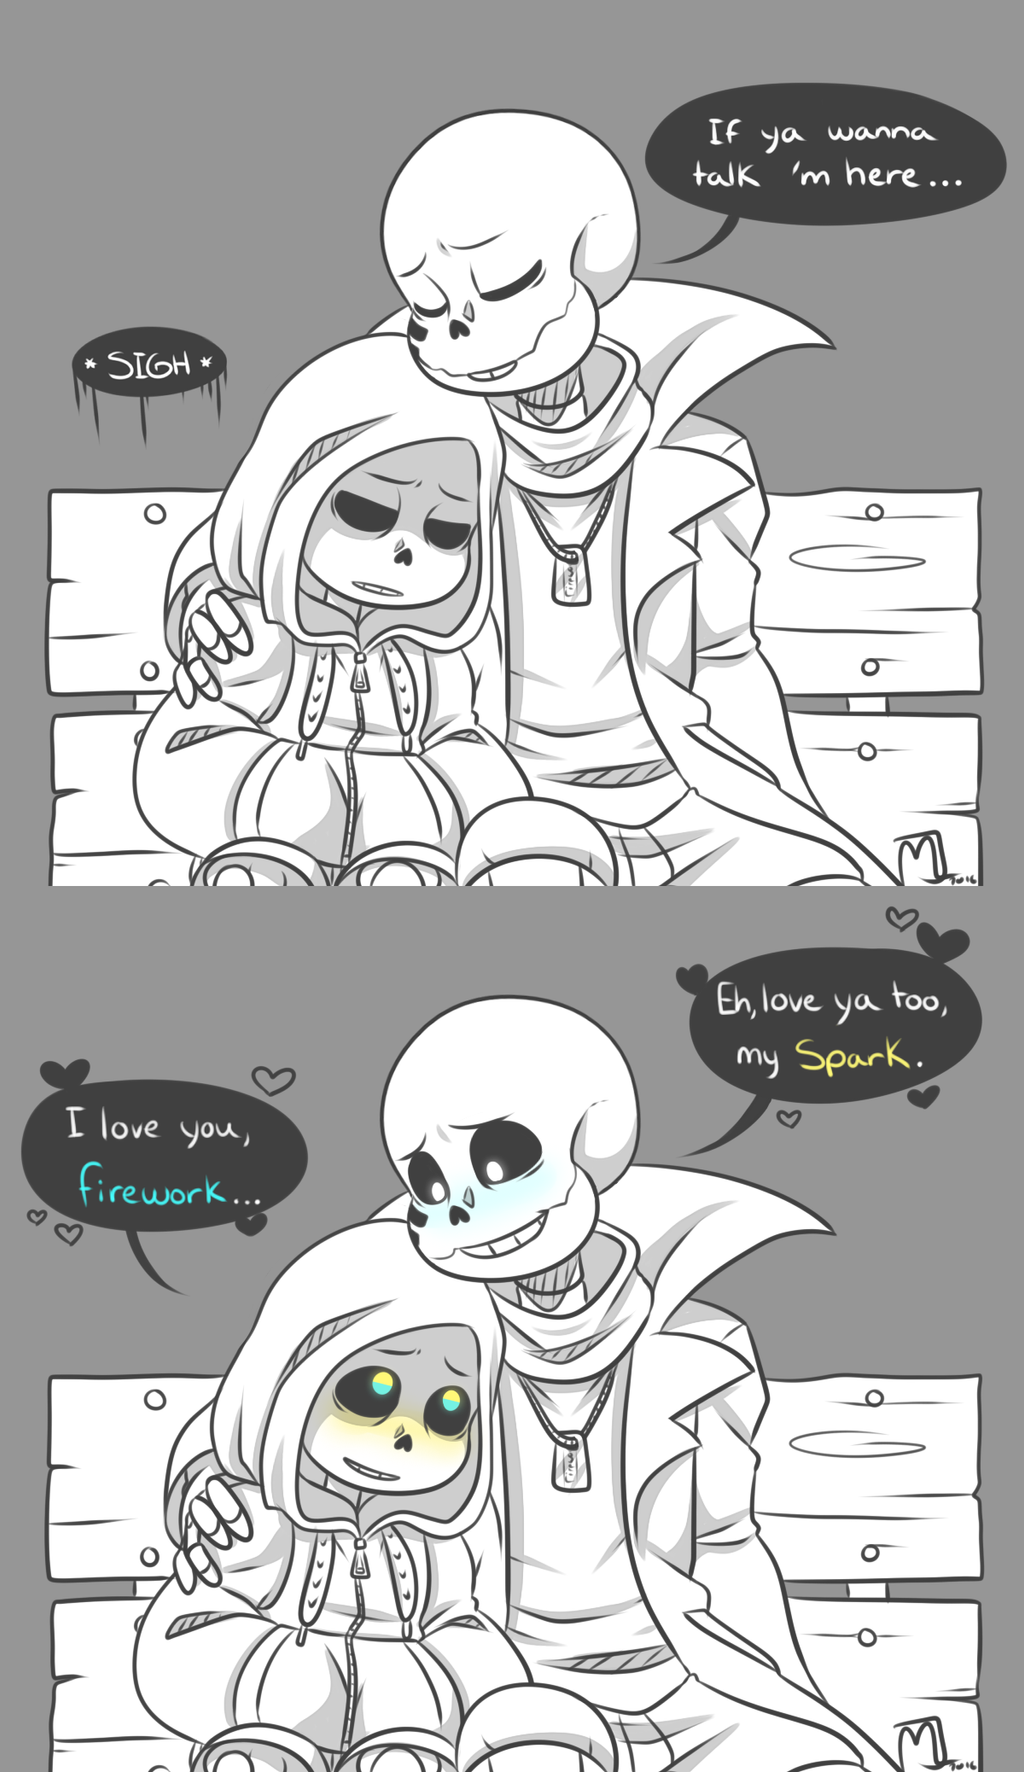 Underdecay- Do you love someone ? by Little-Noko on DeviantArt